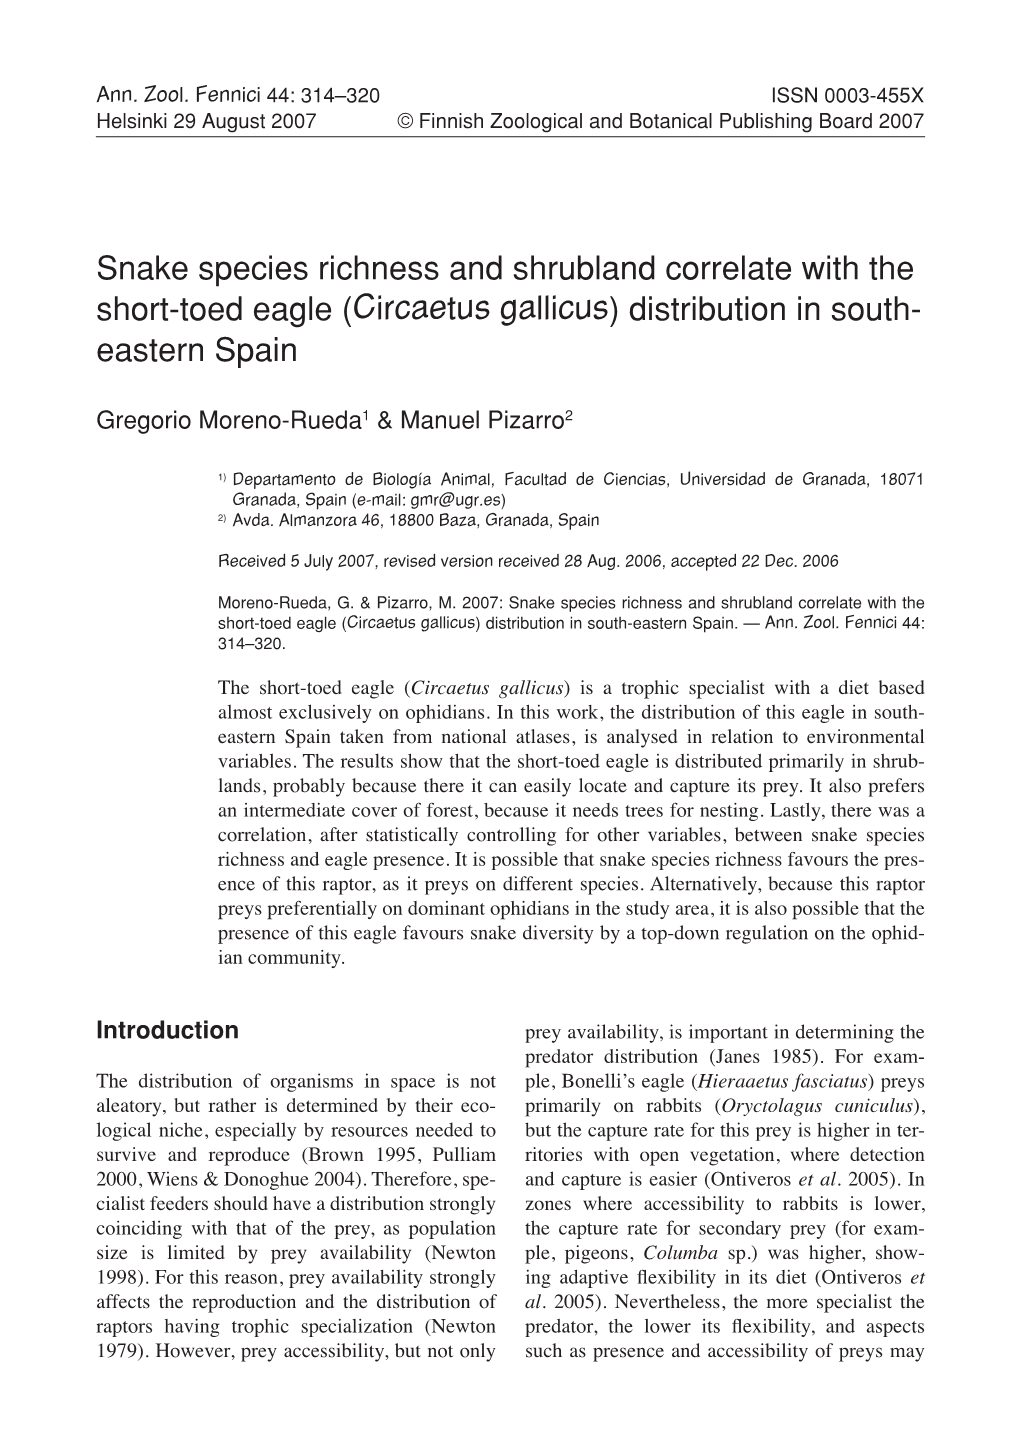 Snake Species Richness and Shrubland Correlate with the Short-Toed Eagle (Circaetus Gallicus) Distribution in South- Eastern Spain